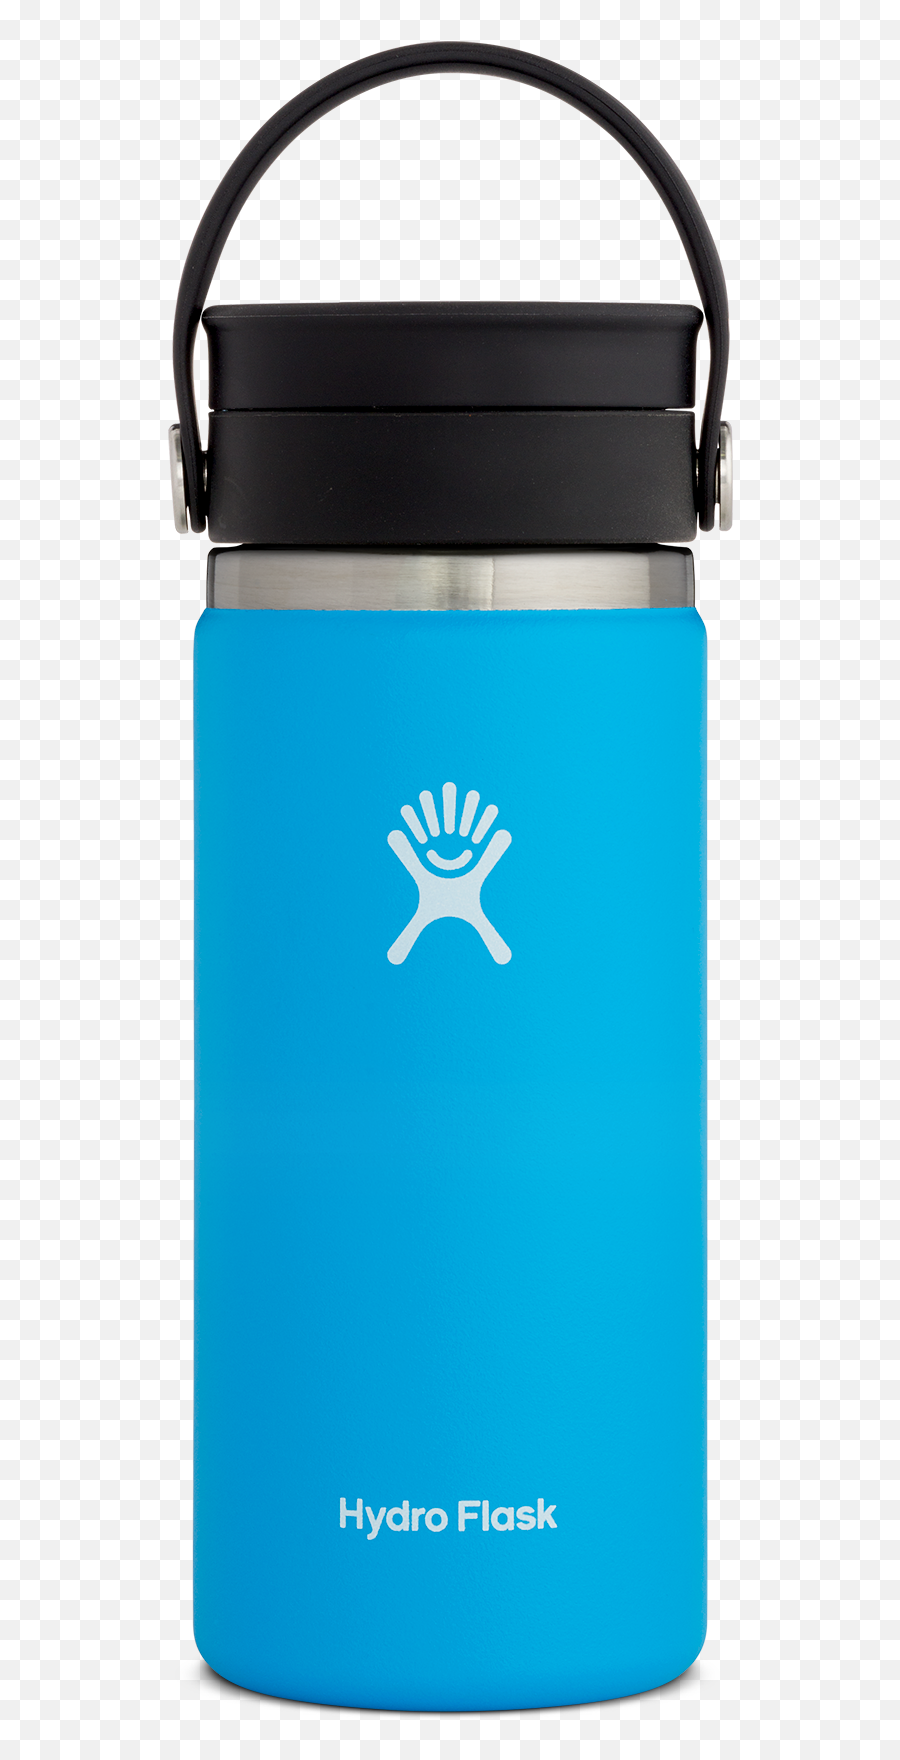 Hydroflask - Hydro Flask 12 Oz Png,Hydro Flask Png